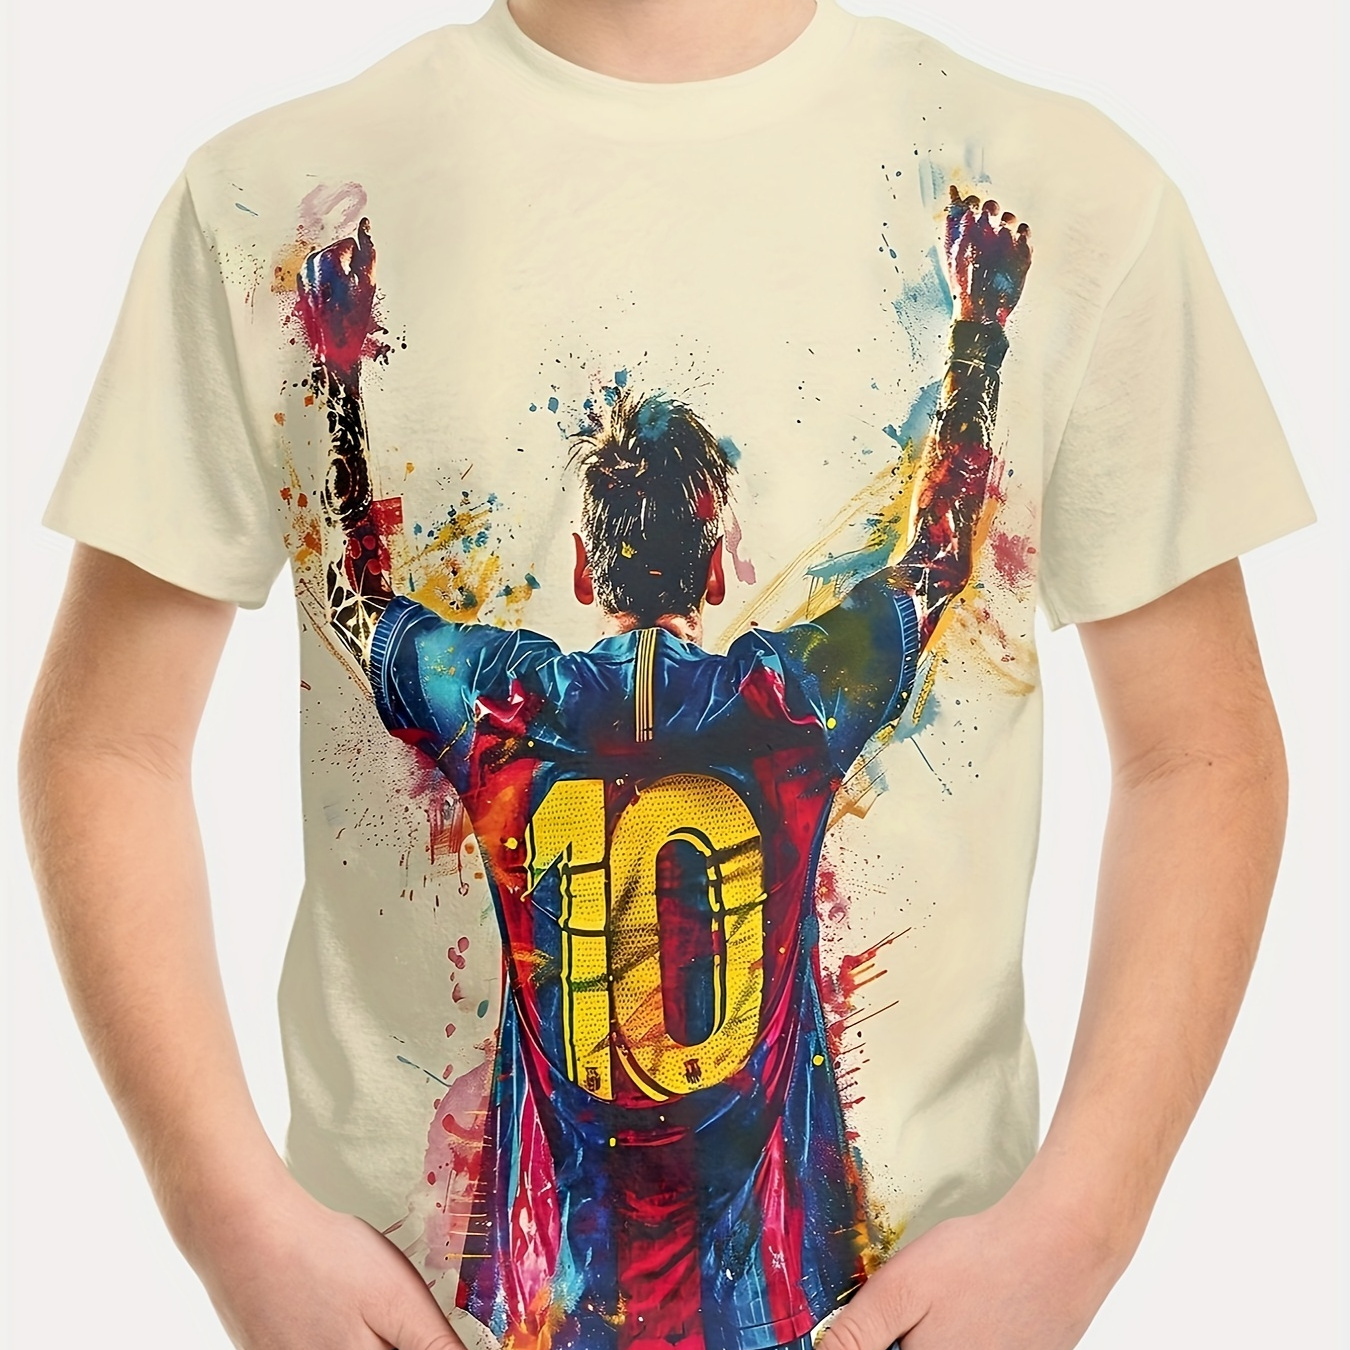 

Soccer Player Graffiti 3d Print T-shirts For Boys - Cool, Lightweight And Comfy Summer Clothes!